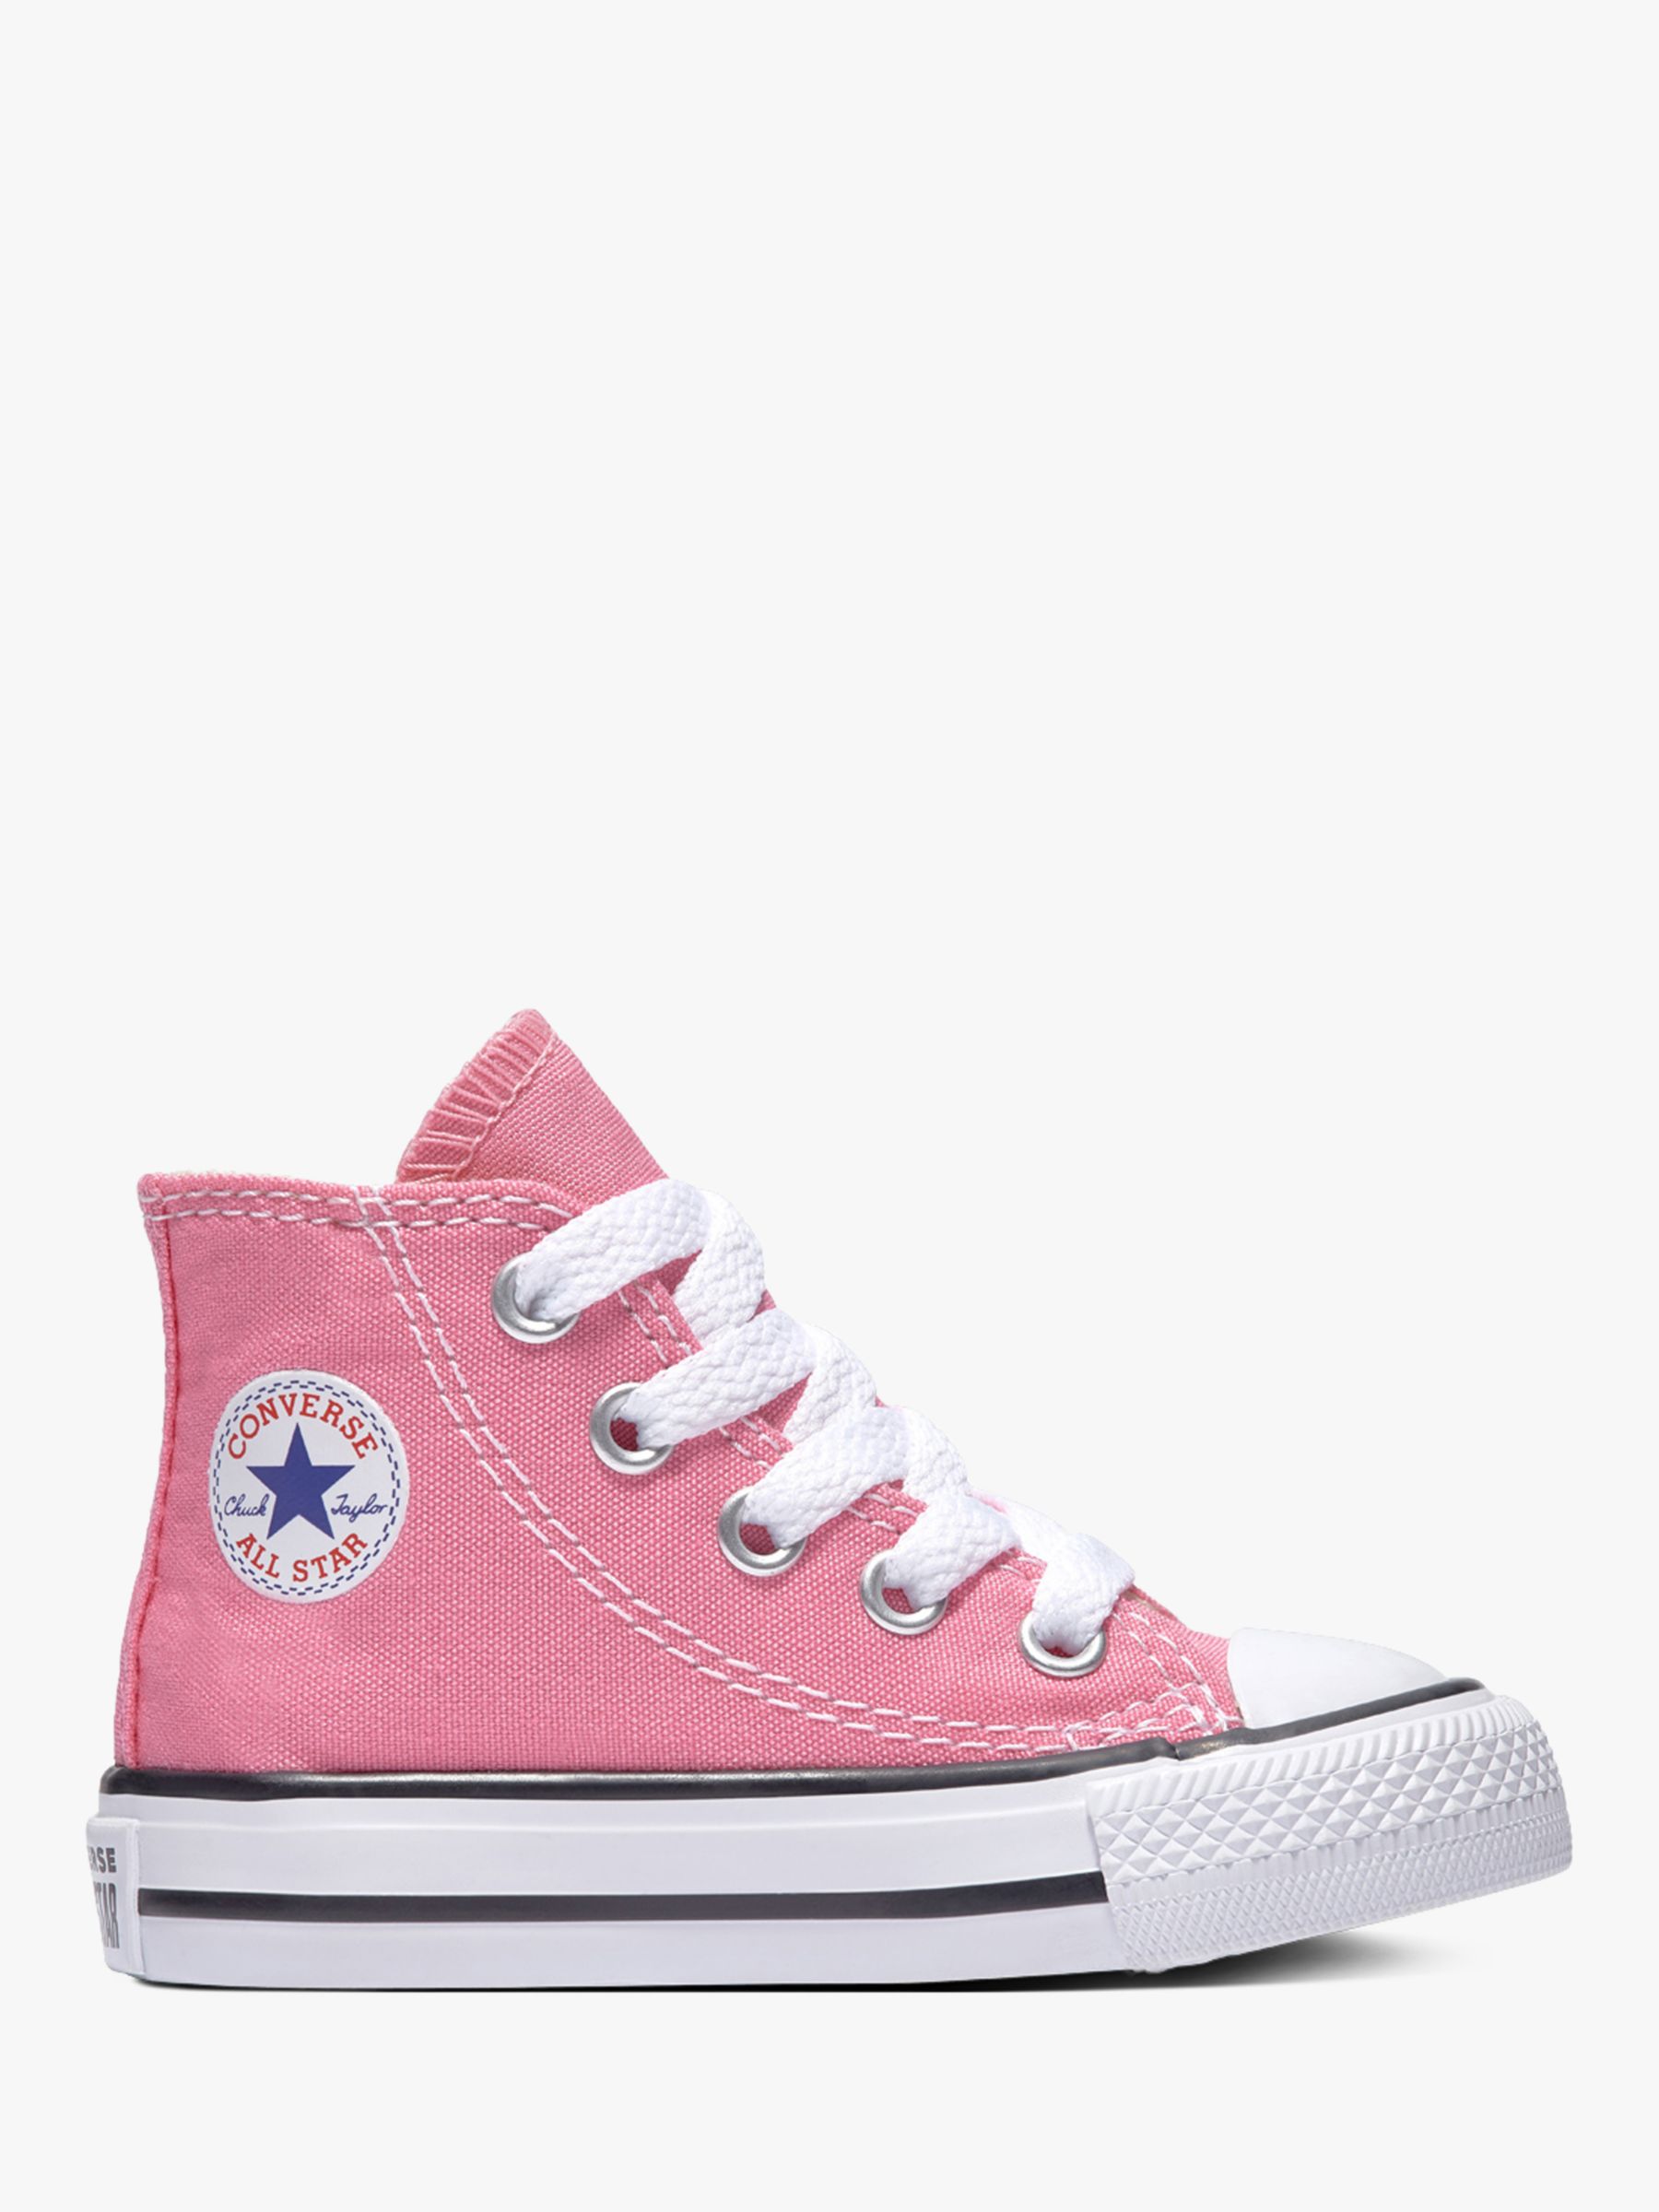 converse childrens high tops